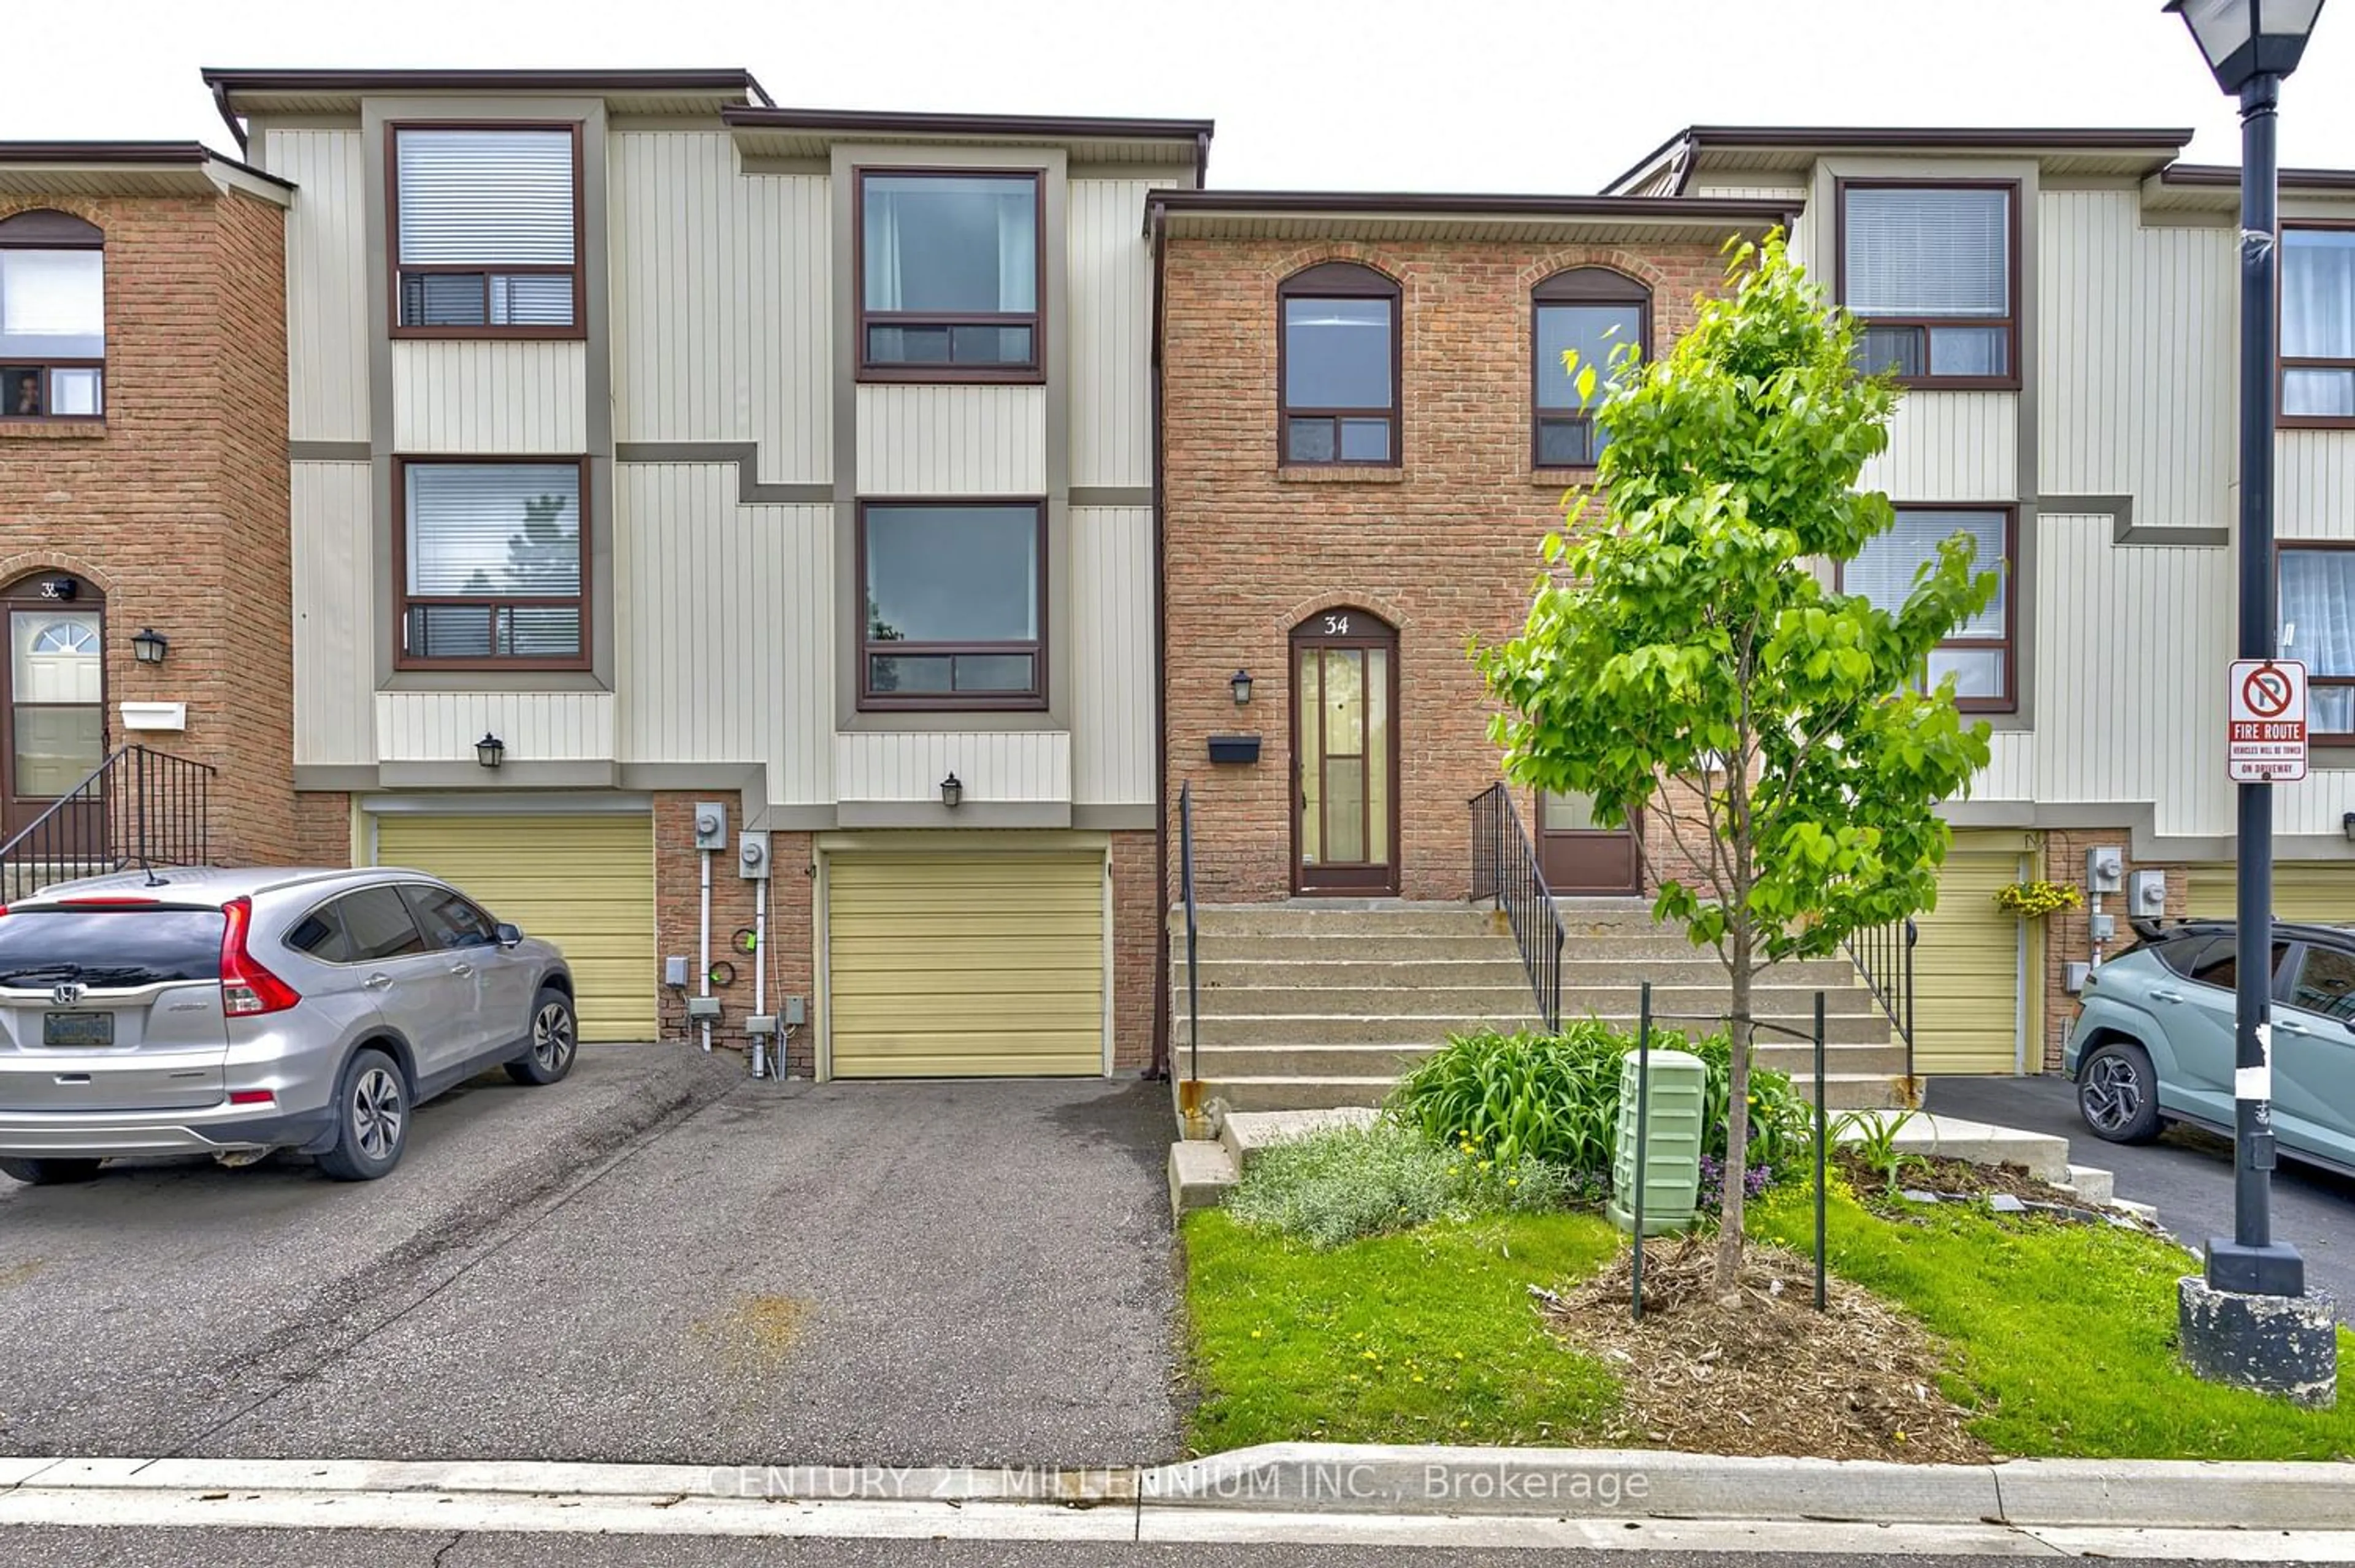 A pic from exterior of the house or condo for 34 Mcmullen Cres #34, Brampton Ontario L6S 3M2